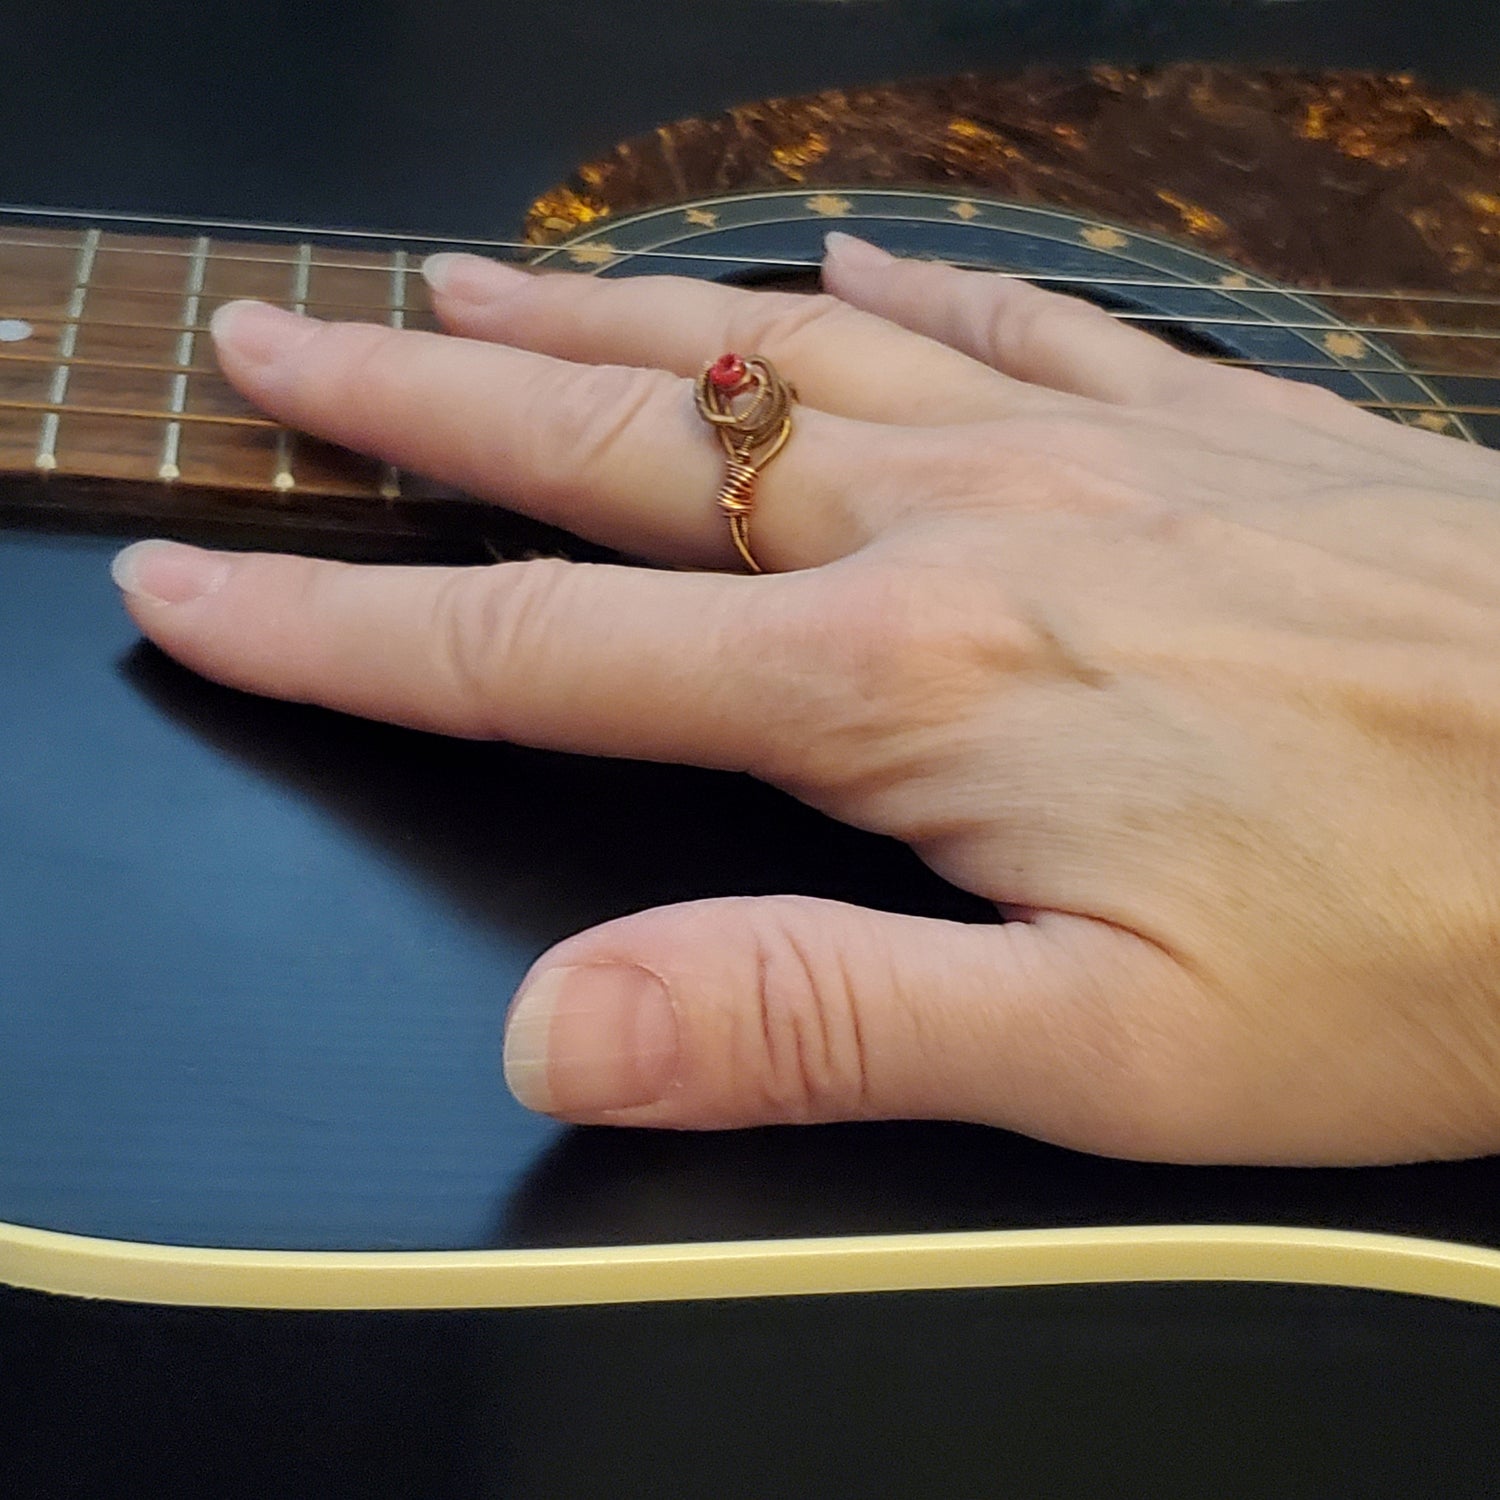 woman's hand lying on top of a black guitar- on her finger she is wearing a ing in the shape of a rose, made from an upcycled guitar string